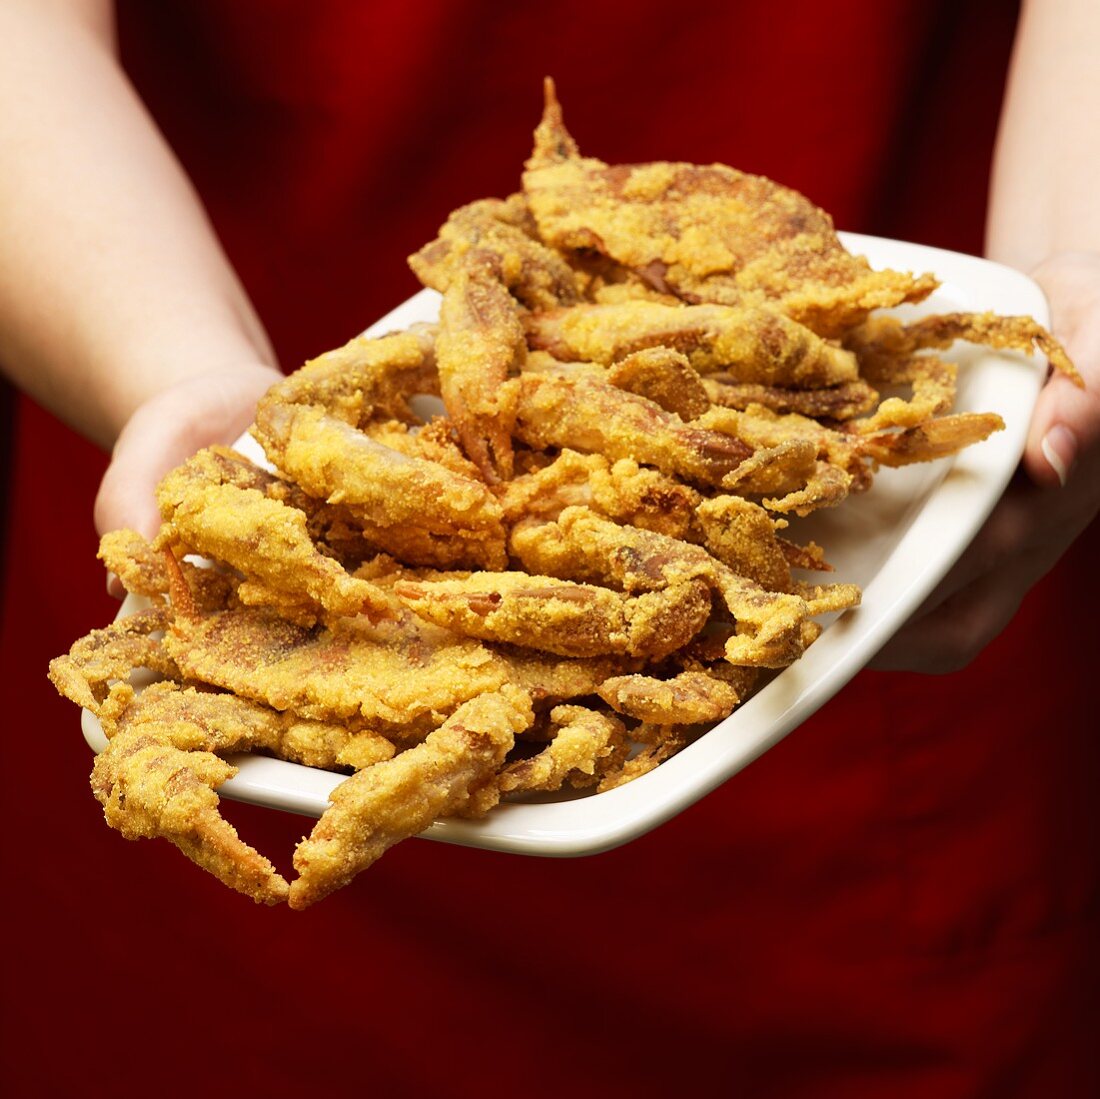 Person Holding Platter of Fried Soft Shell Crabs